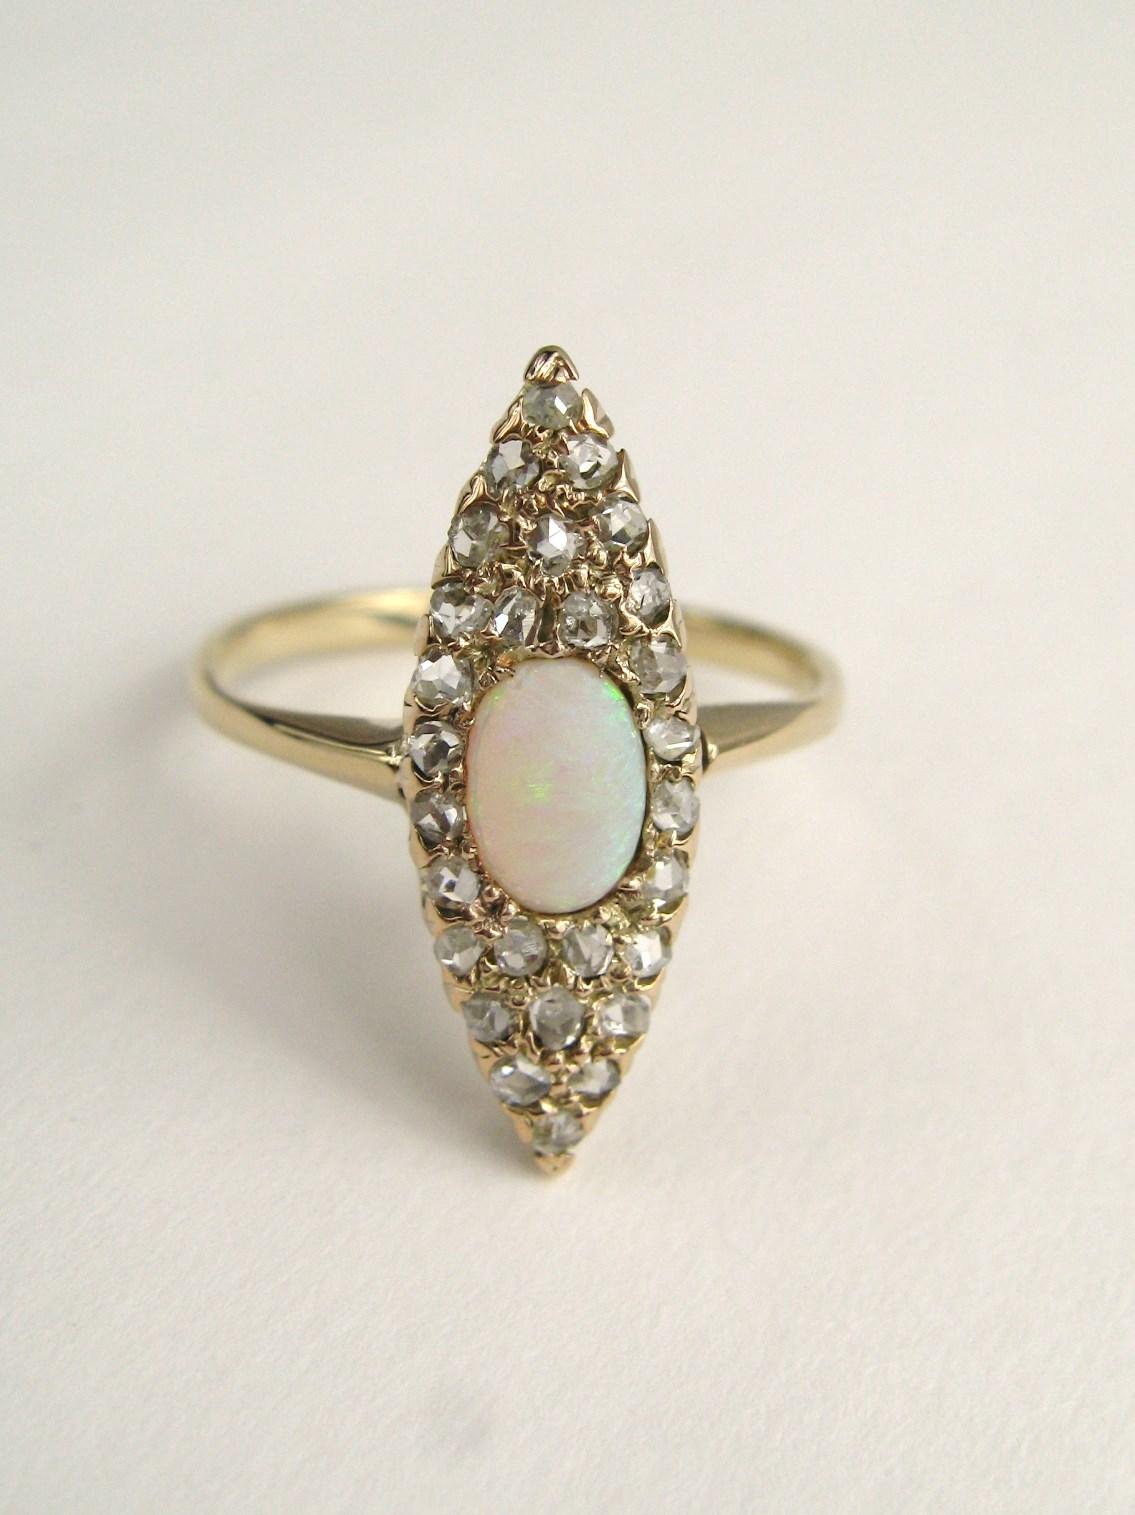 This wonderful antique Victorian opal and Rose Cut Diamond Ring is set in 14K gold. The ring measure .78